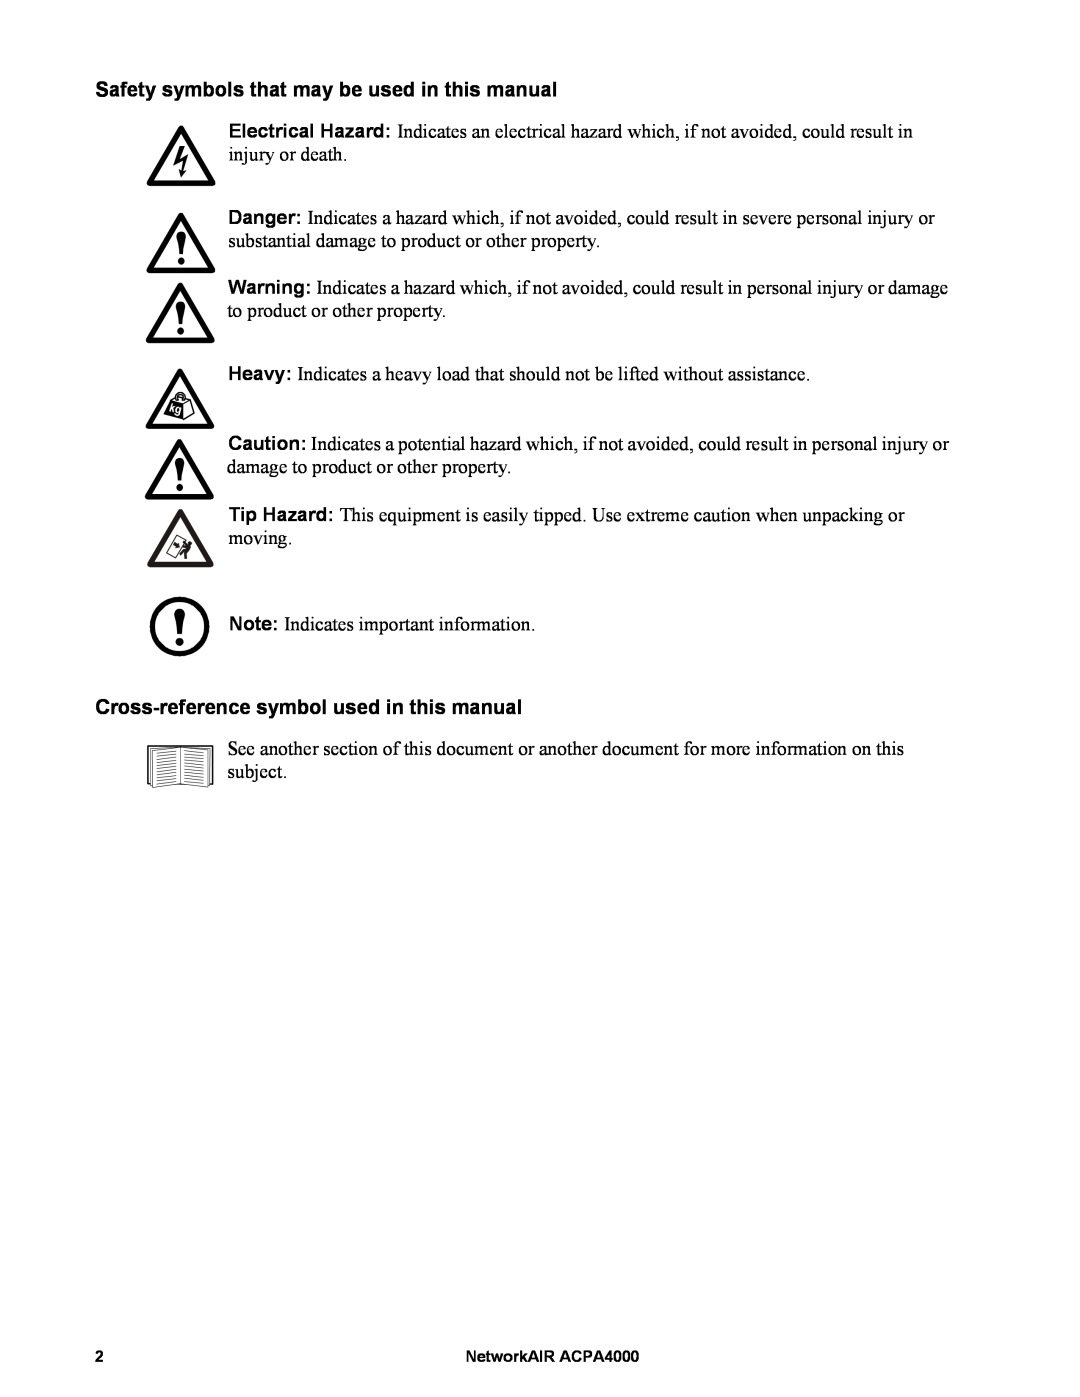 APC ACPA4000 Safety symbols that may be used in this manual, Cross-referencesymbol used in this manual 